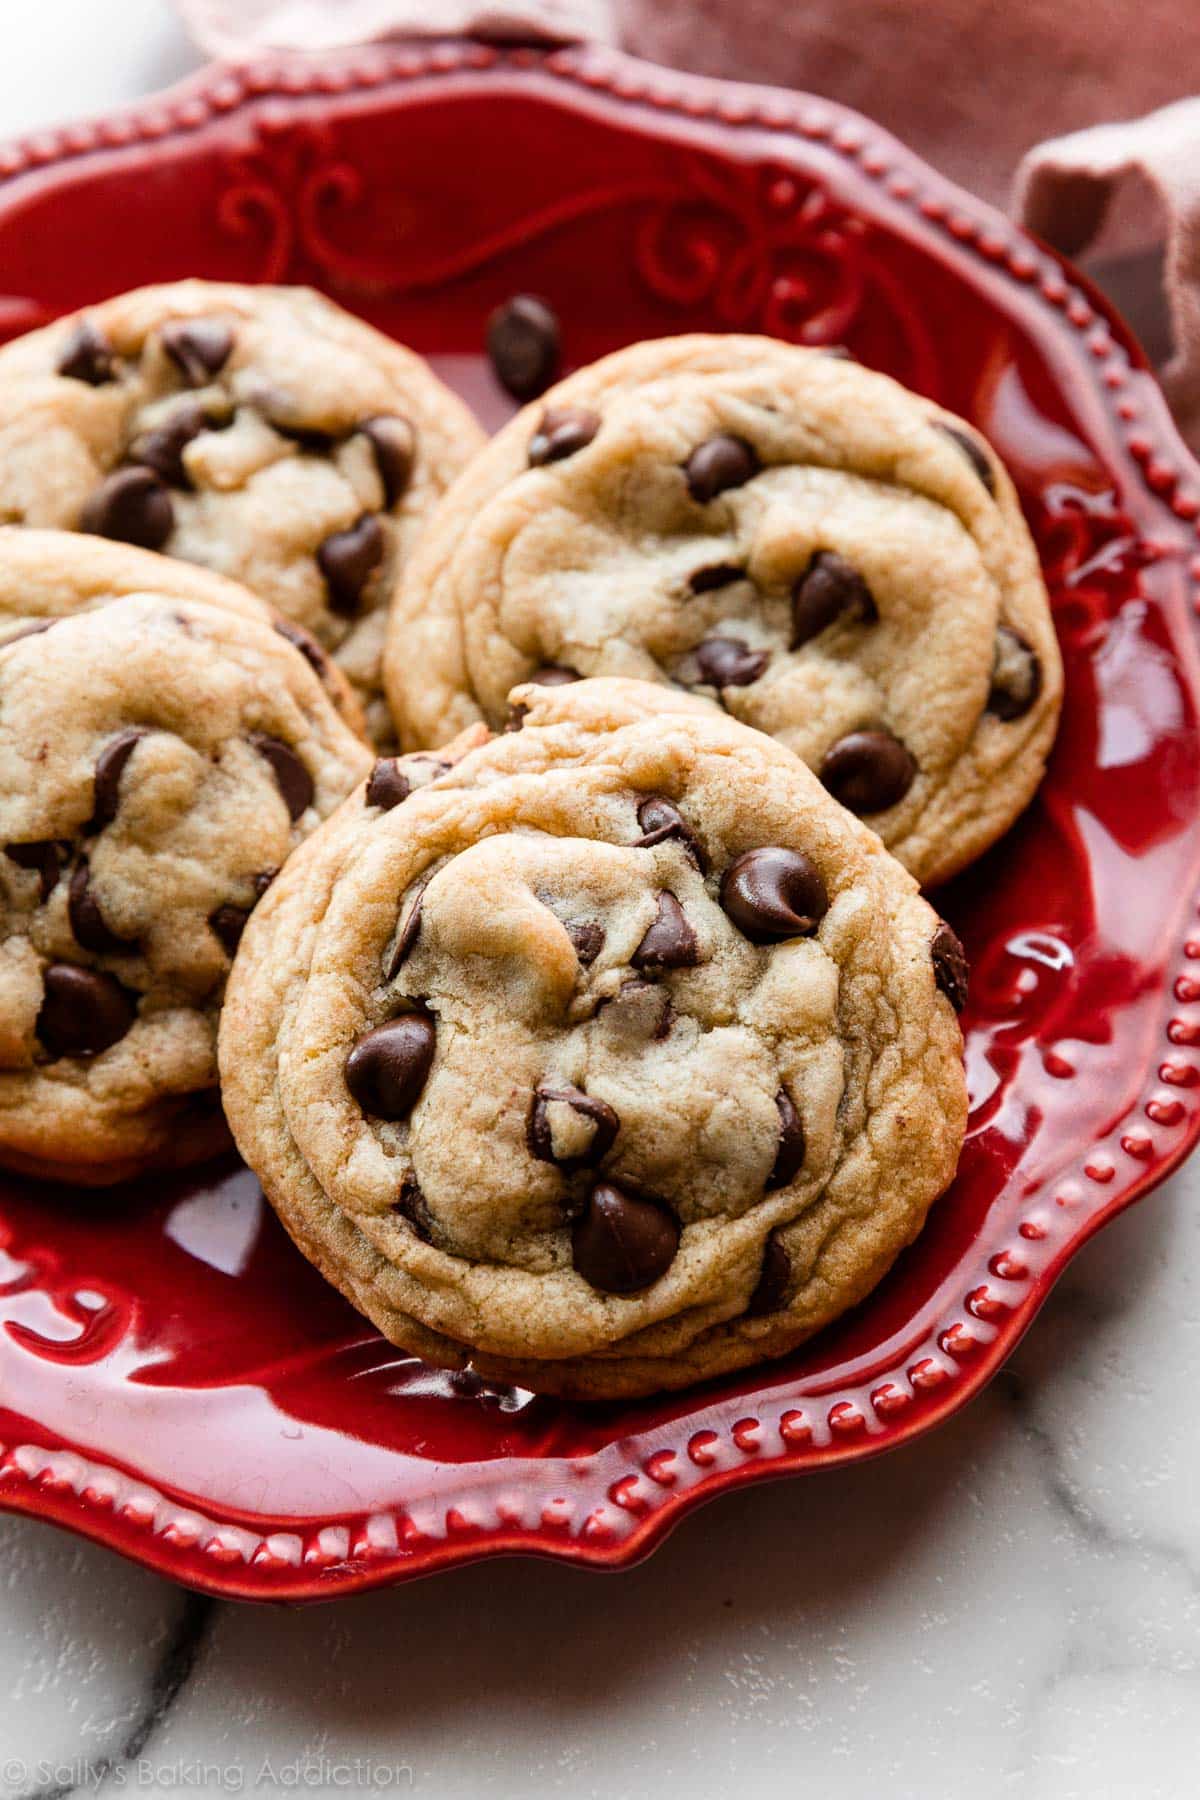 Chocolate chip cookies on a red plate